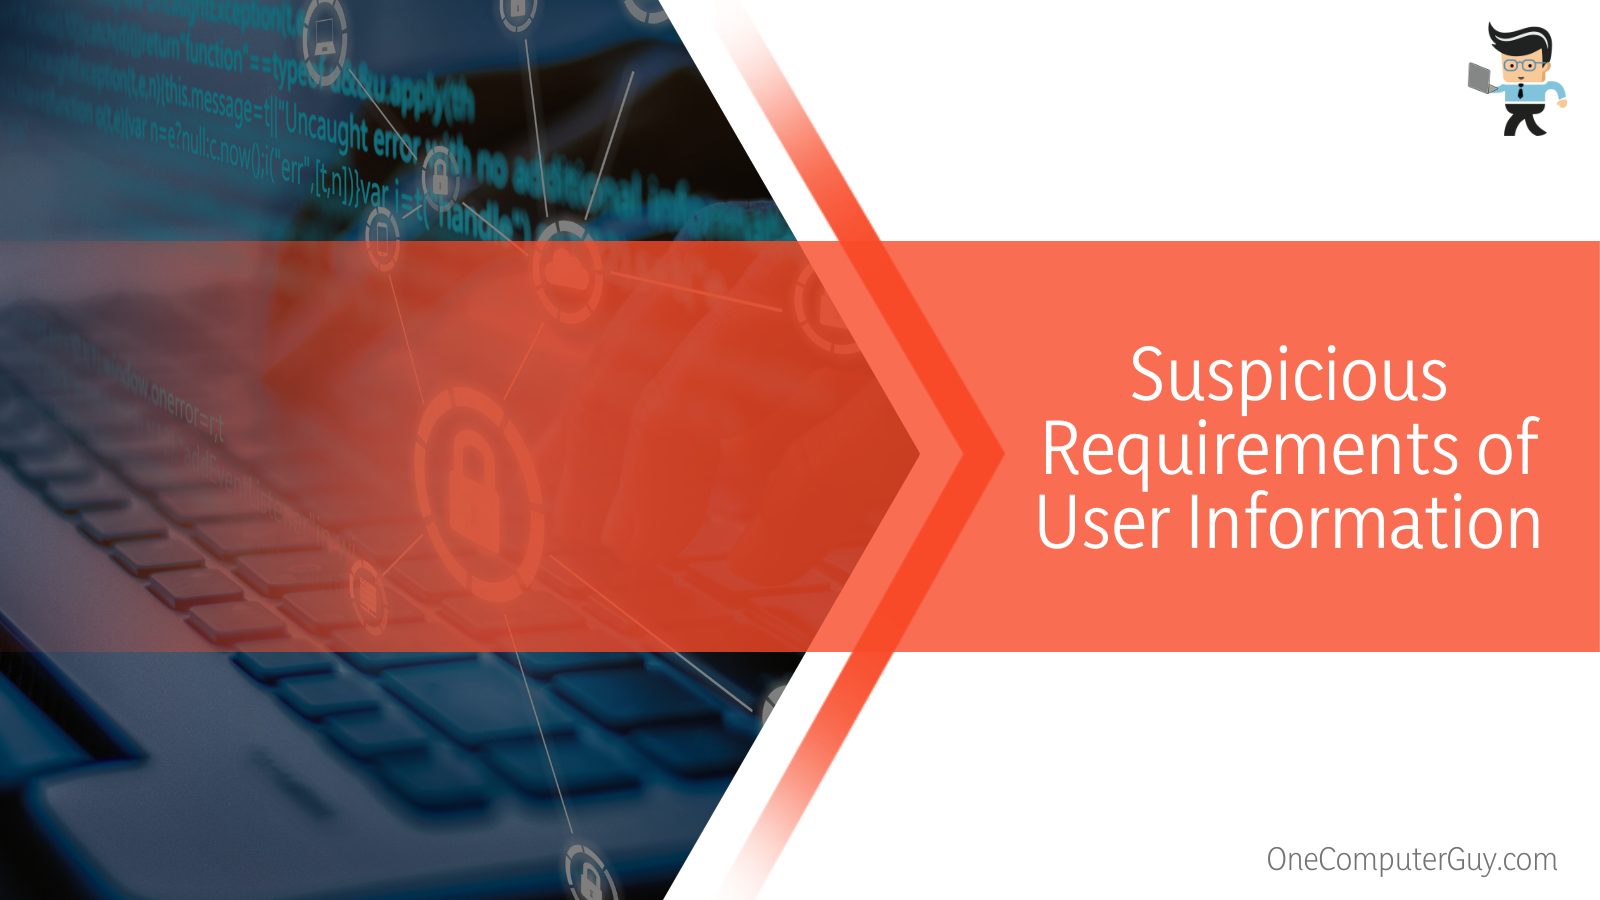 Suspicious Requirements of User Information